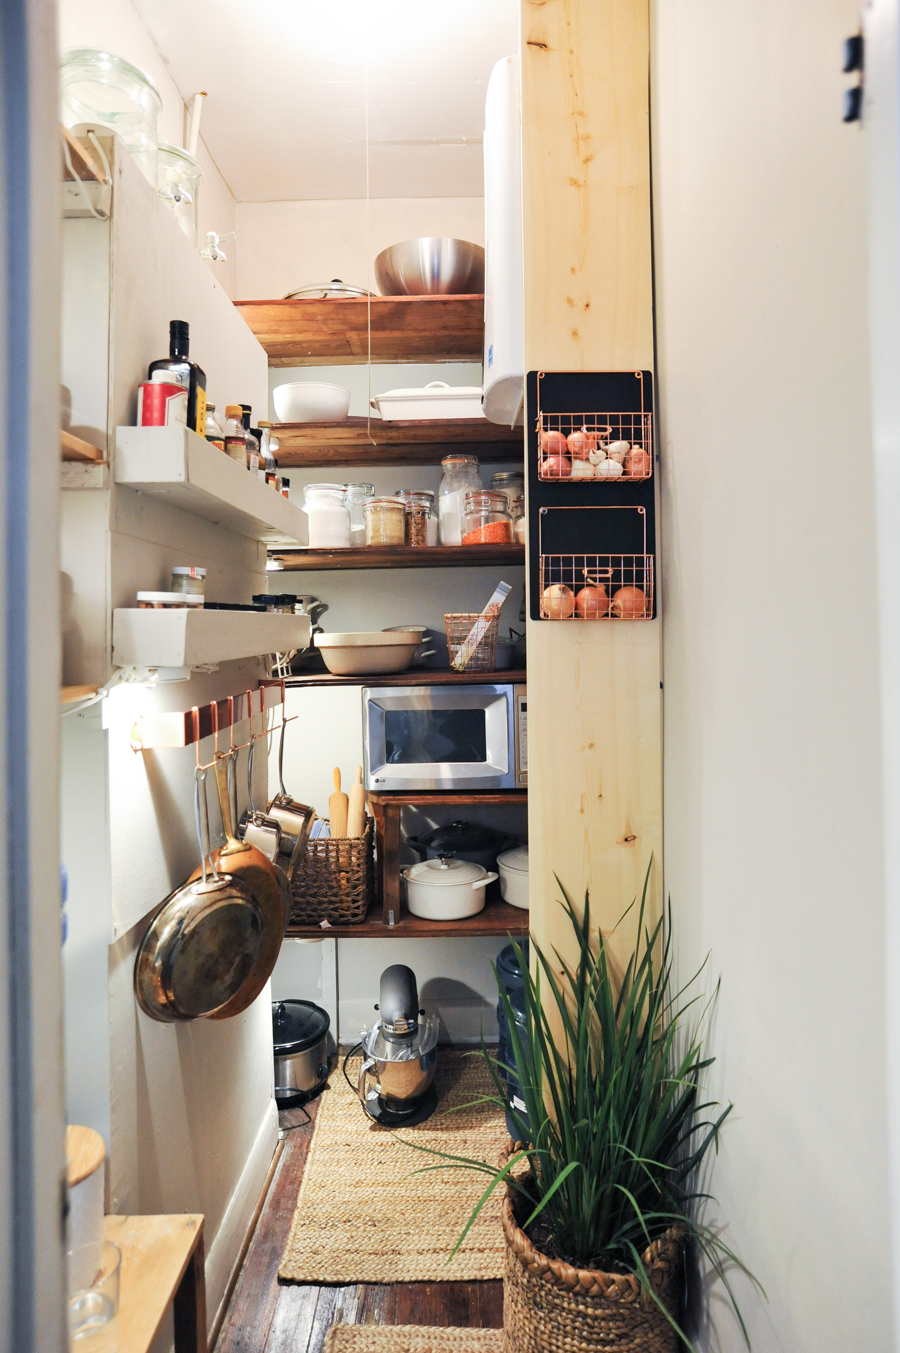 Our Pantry | A Renovation + Organization Project